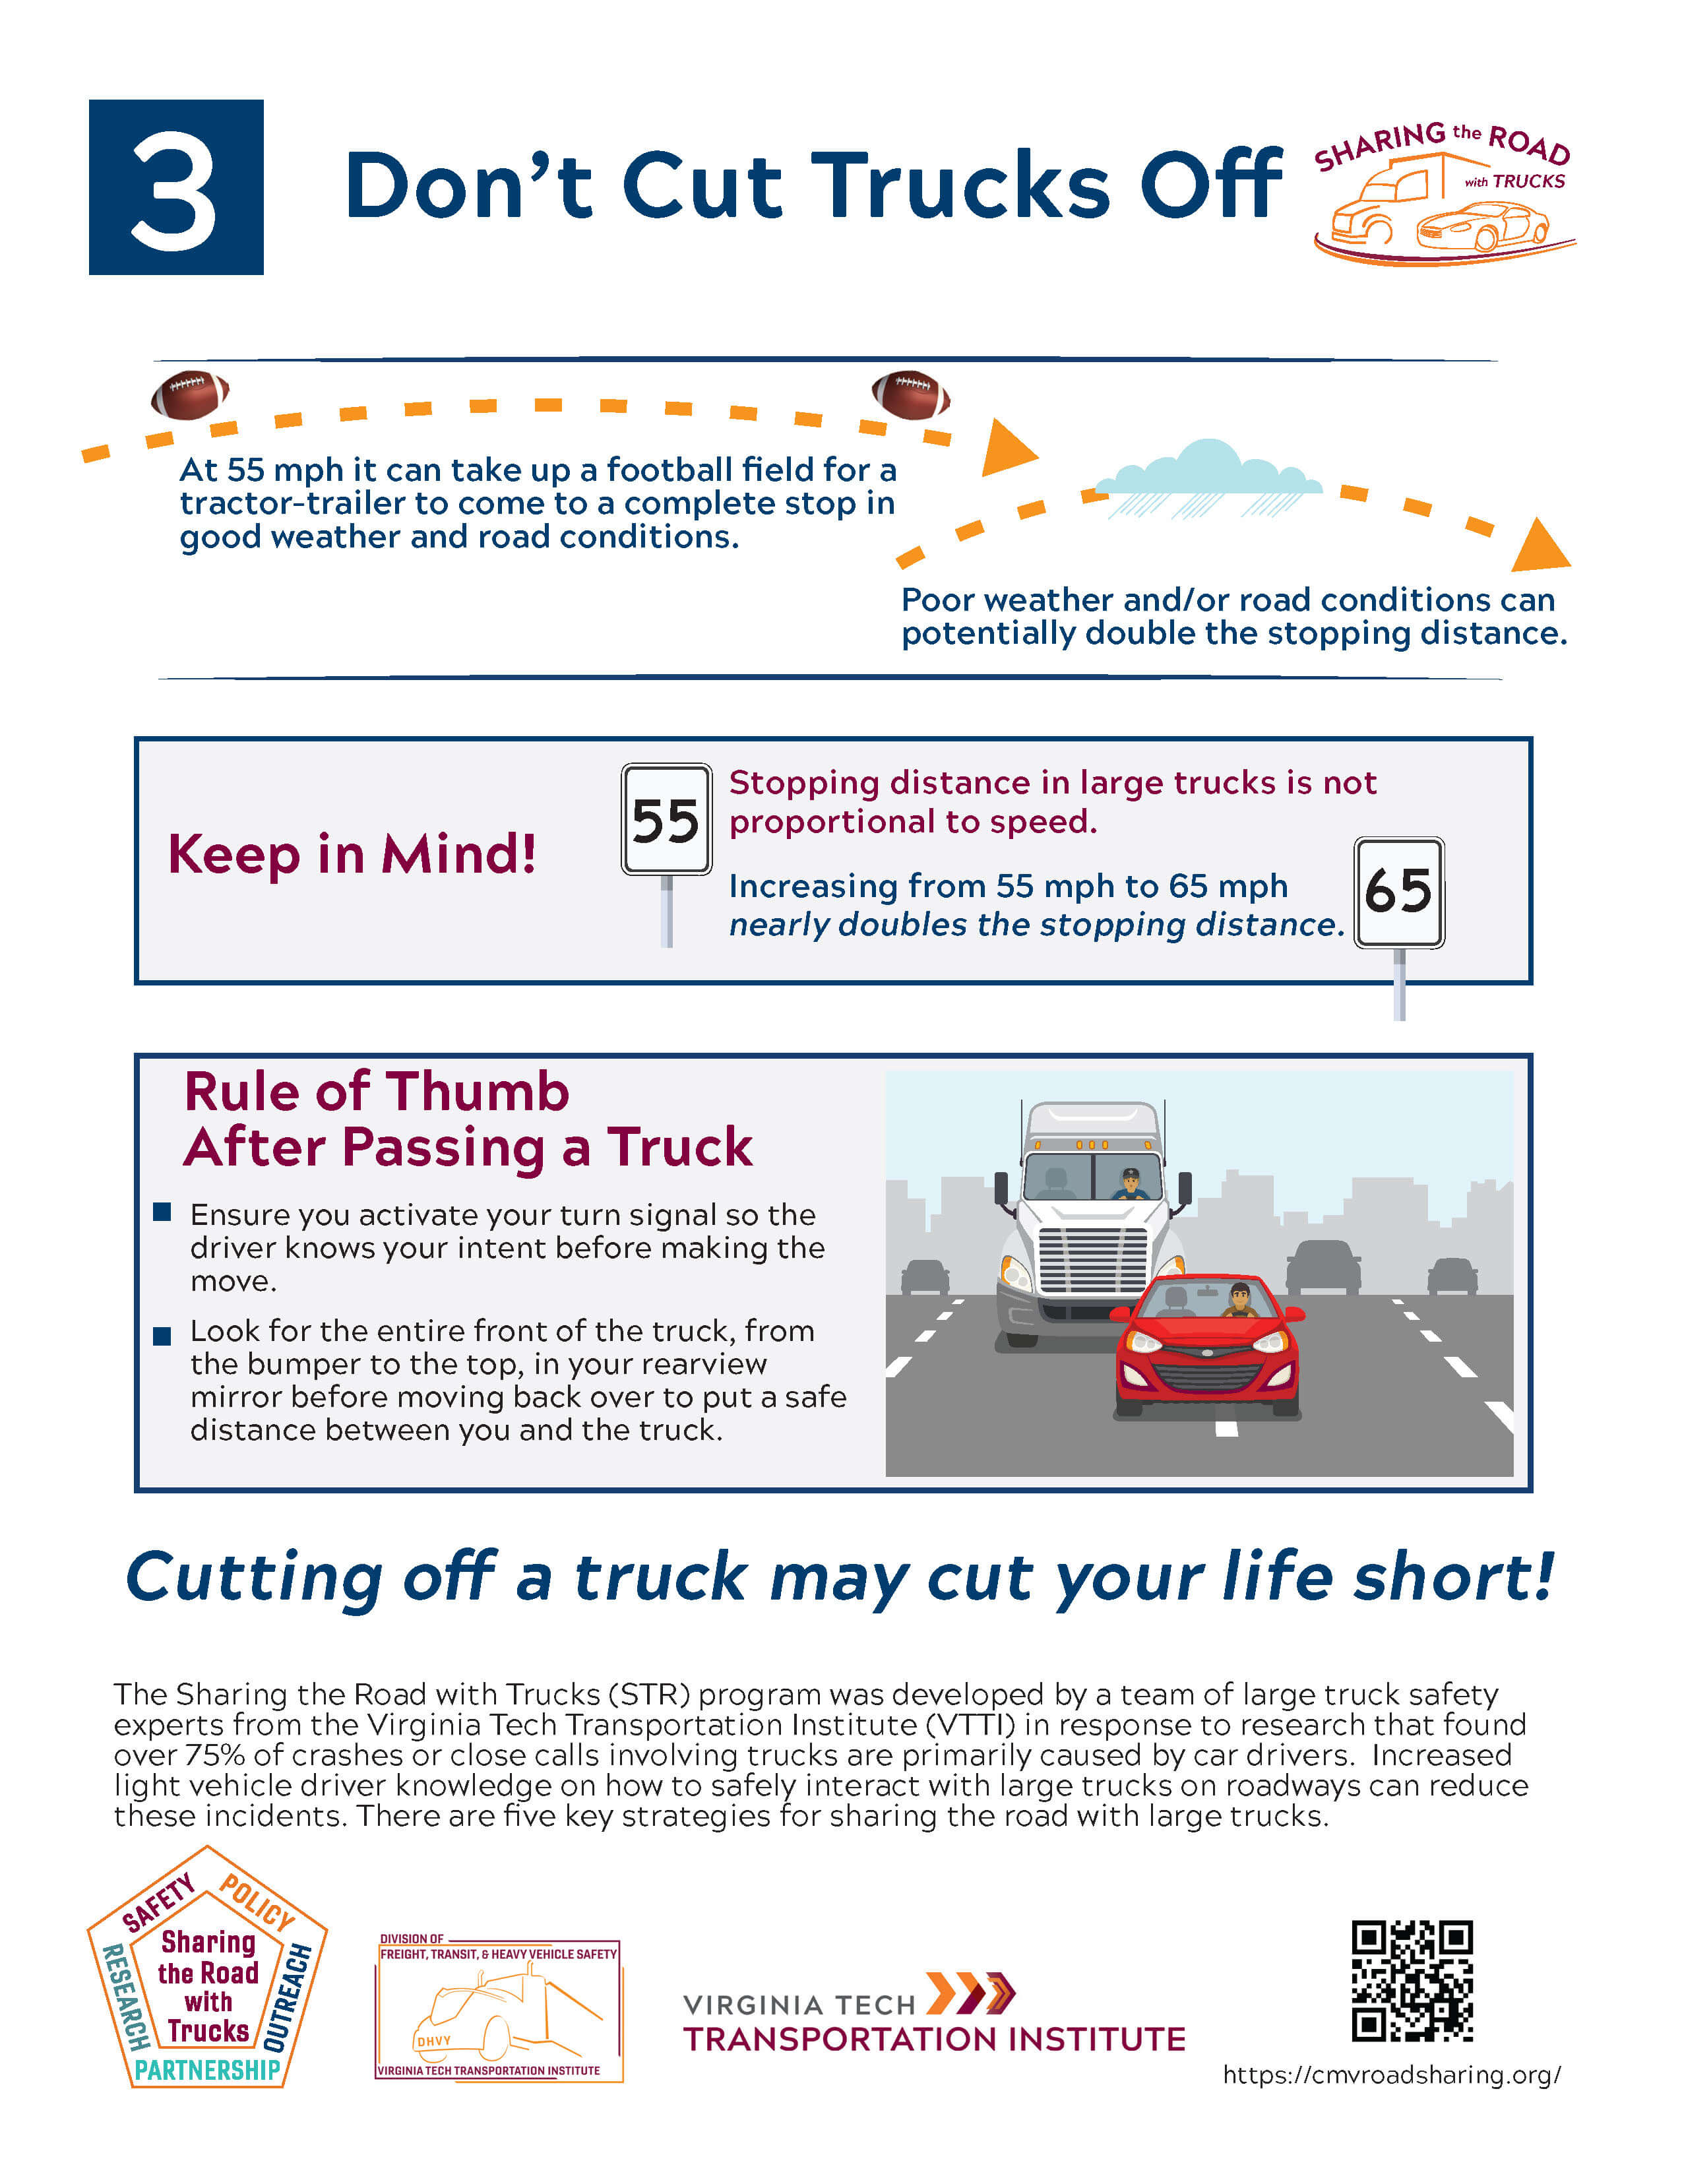 Thumbnail for a one-pager about not cutting trucks off